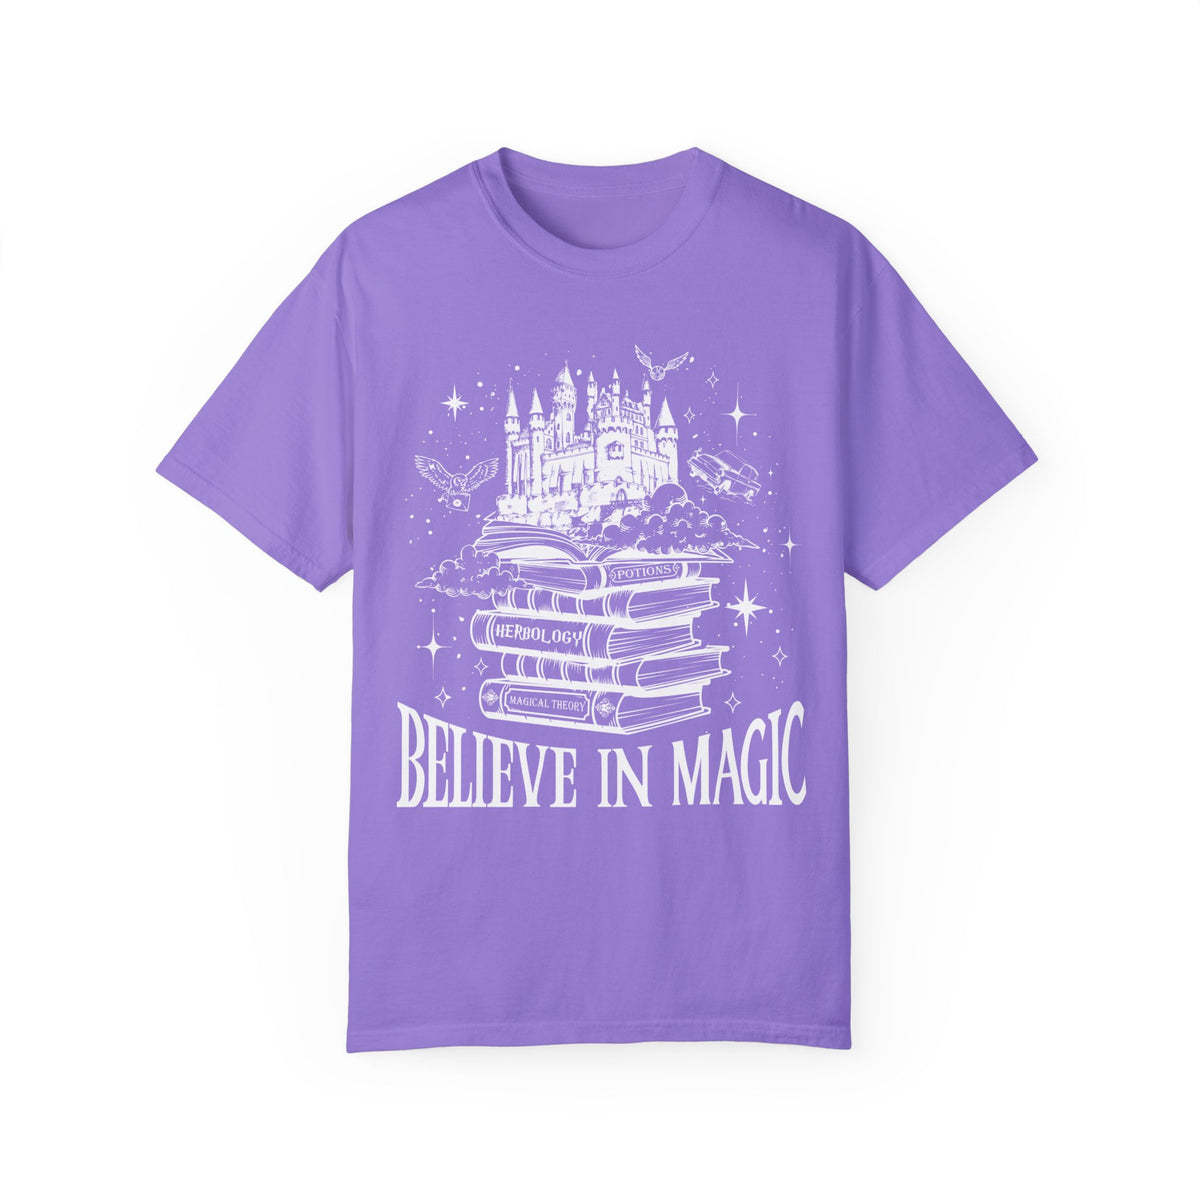 Believe in Magic Comfort Colors Unisex Garment-Dyed T-shirt